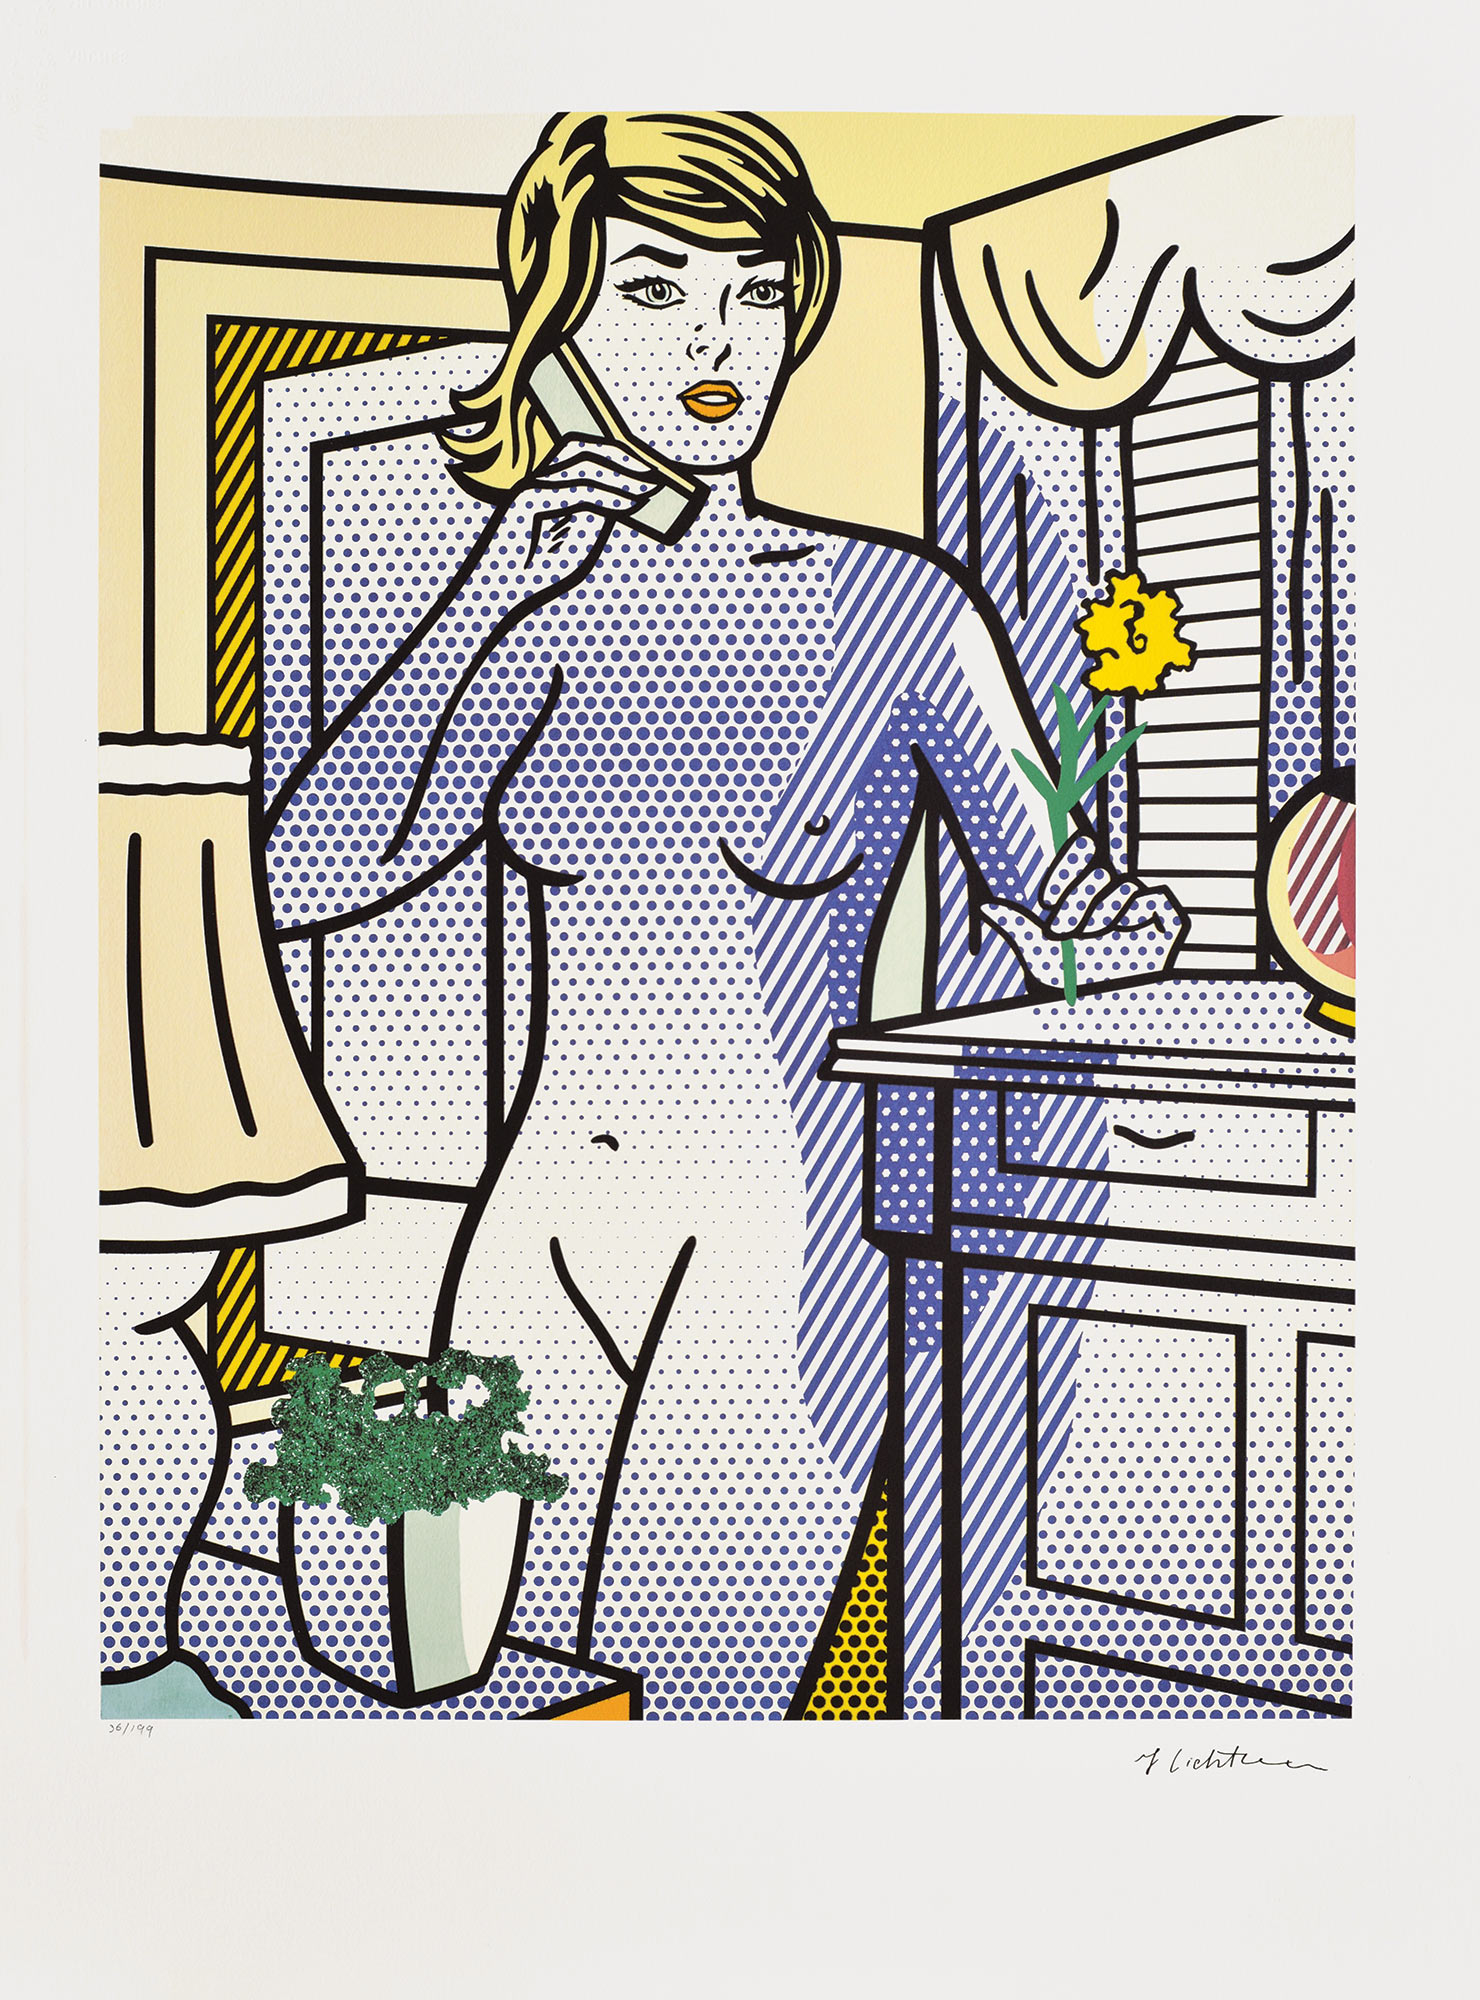 "Nude with a yellow flower", 1994